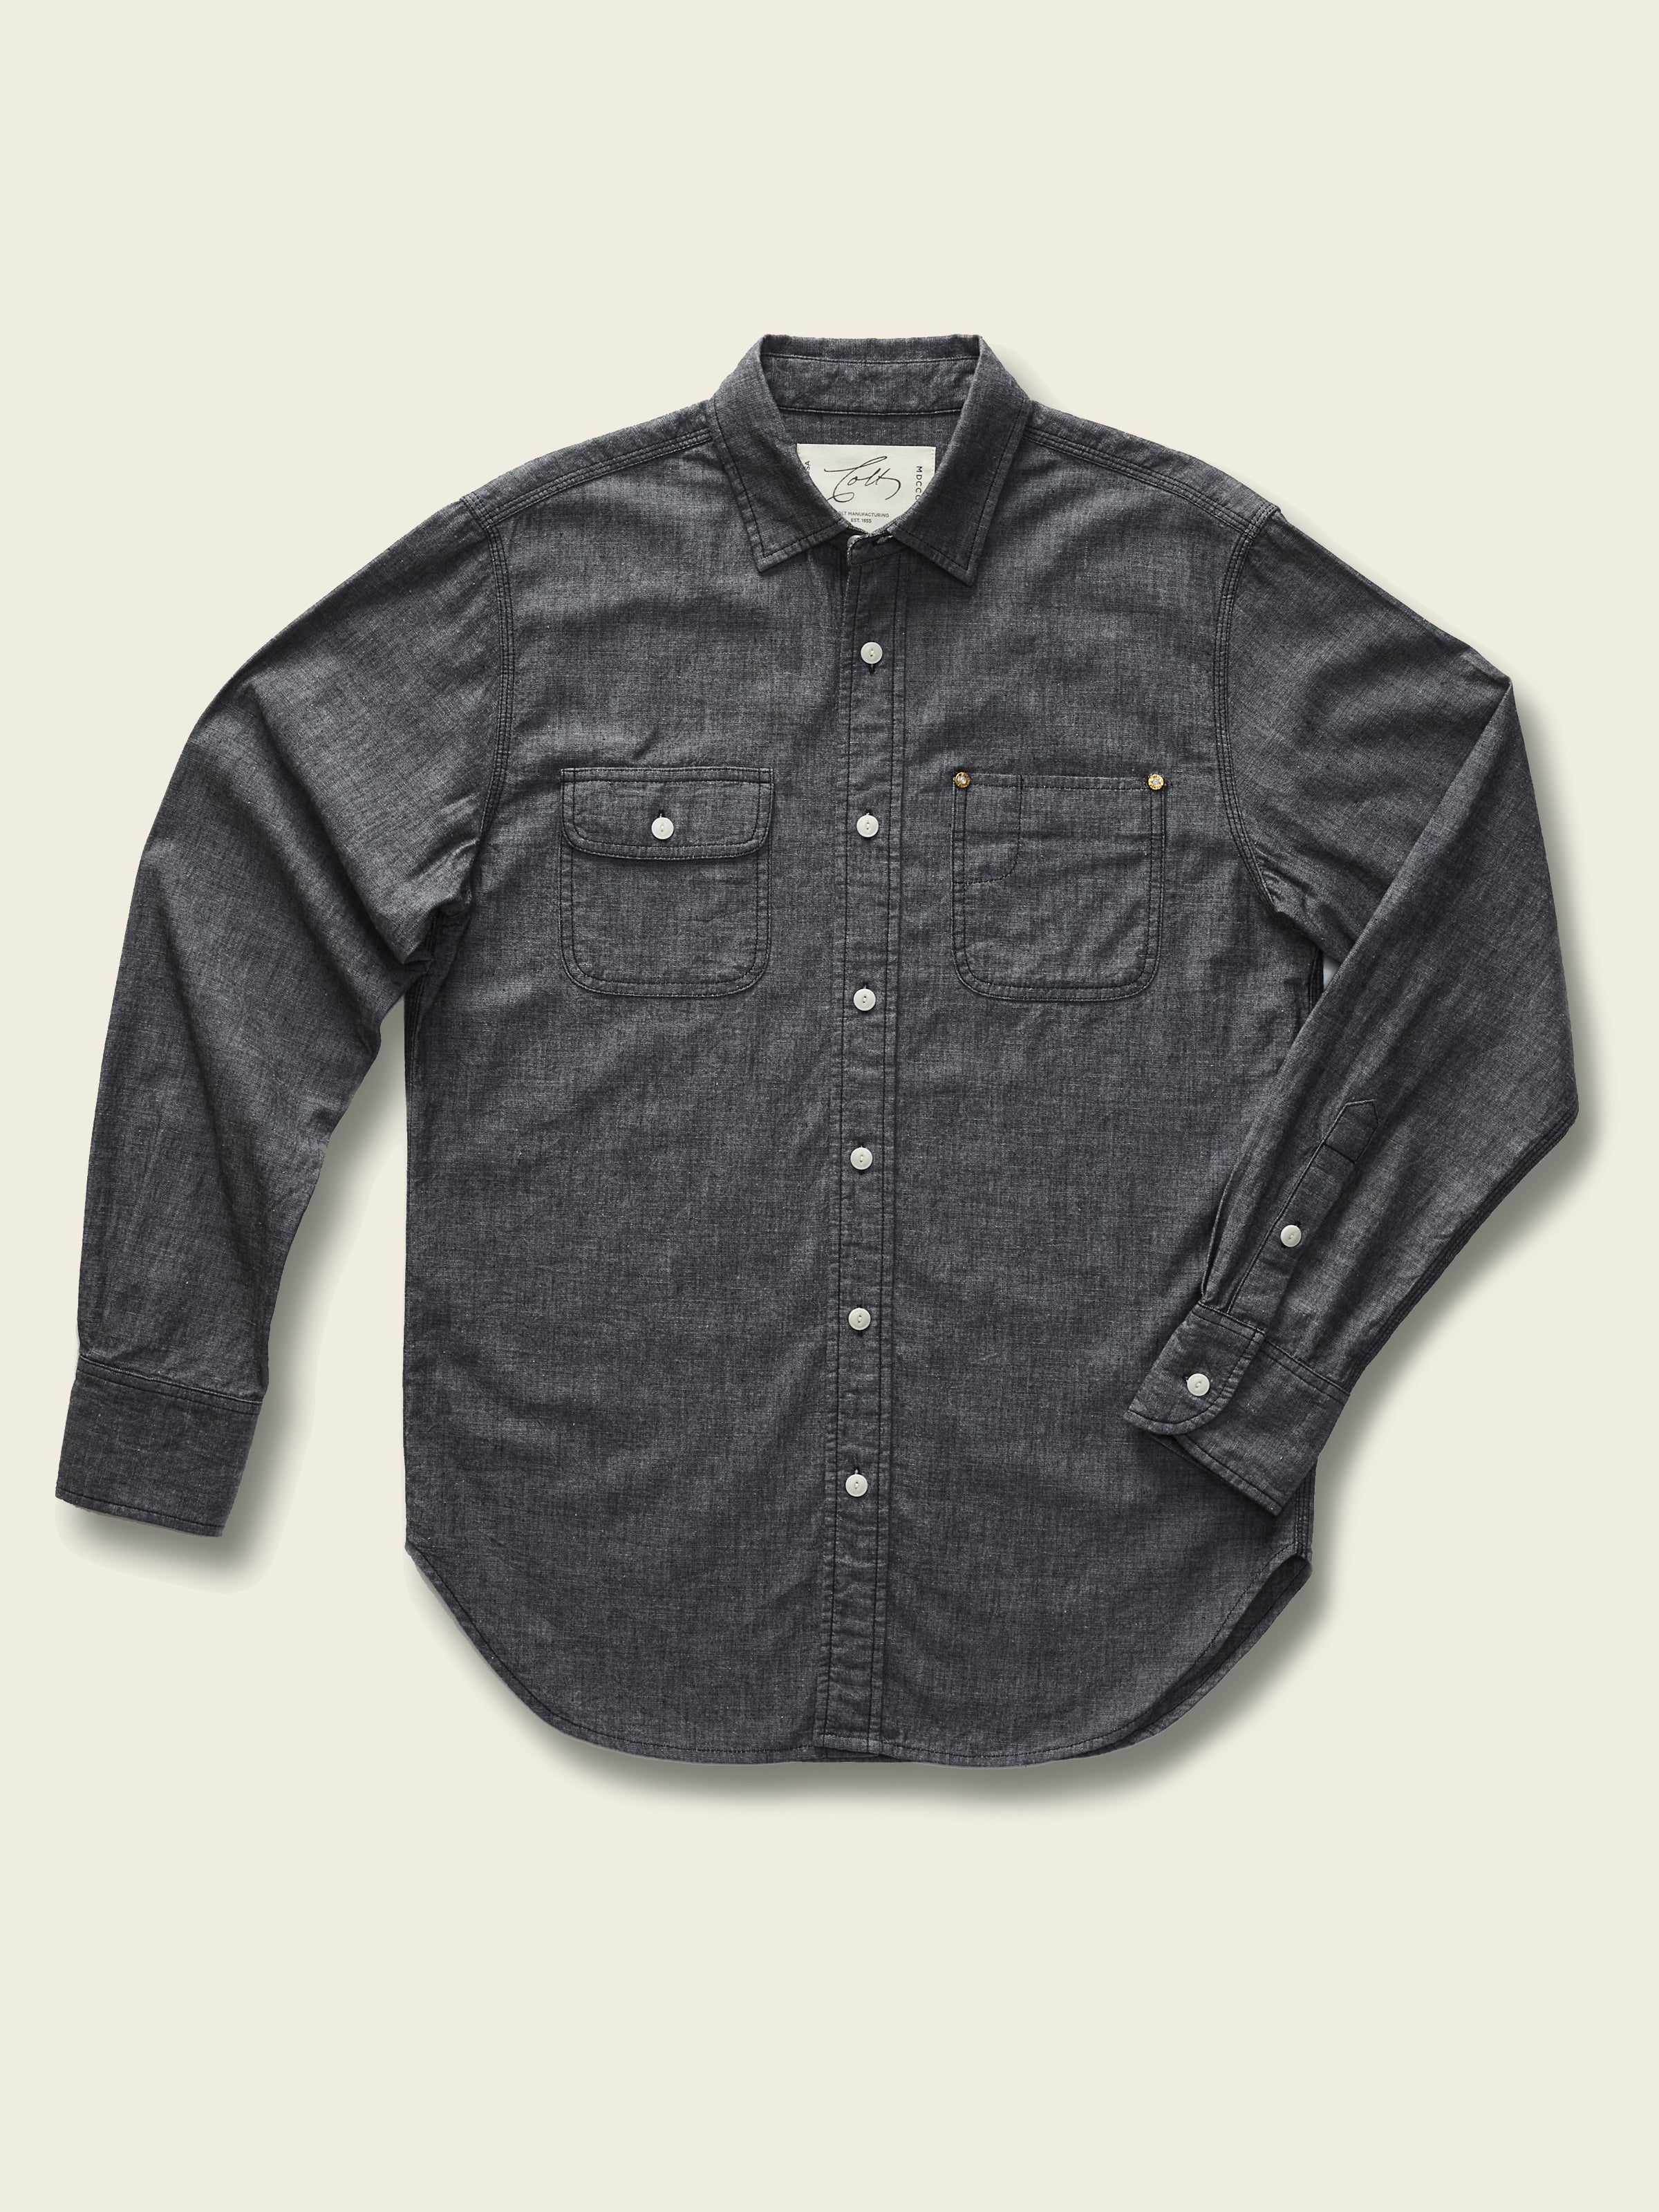 Chambray Shirt in charcoal grey